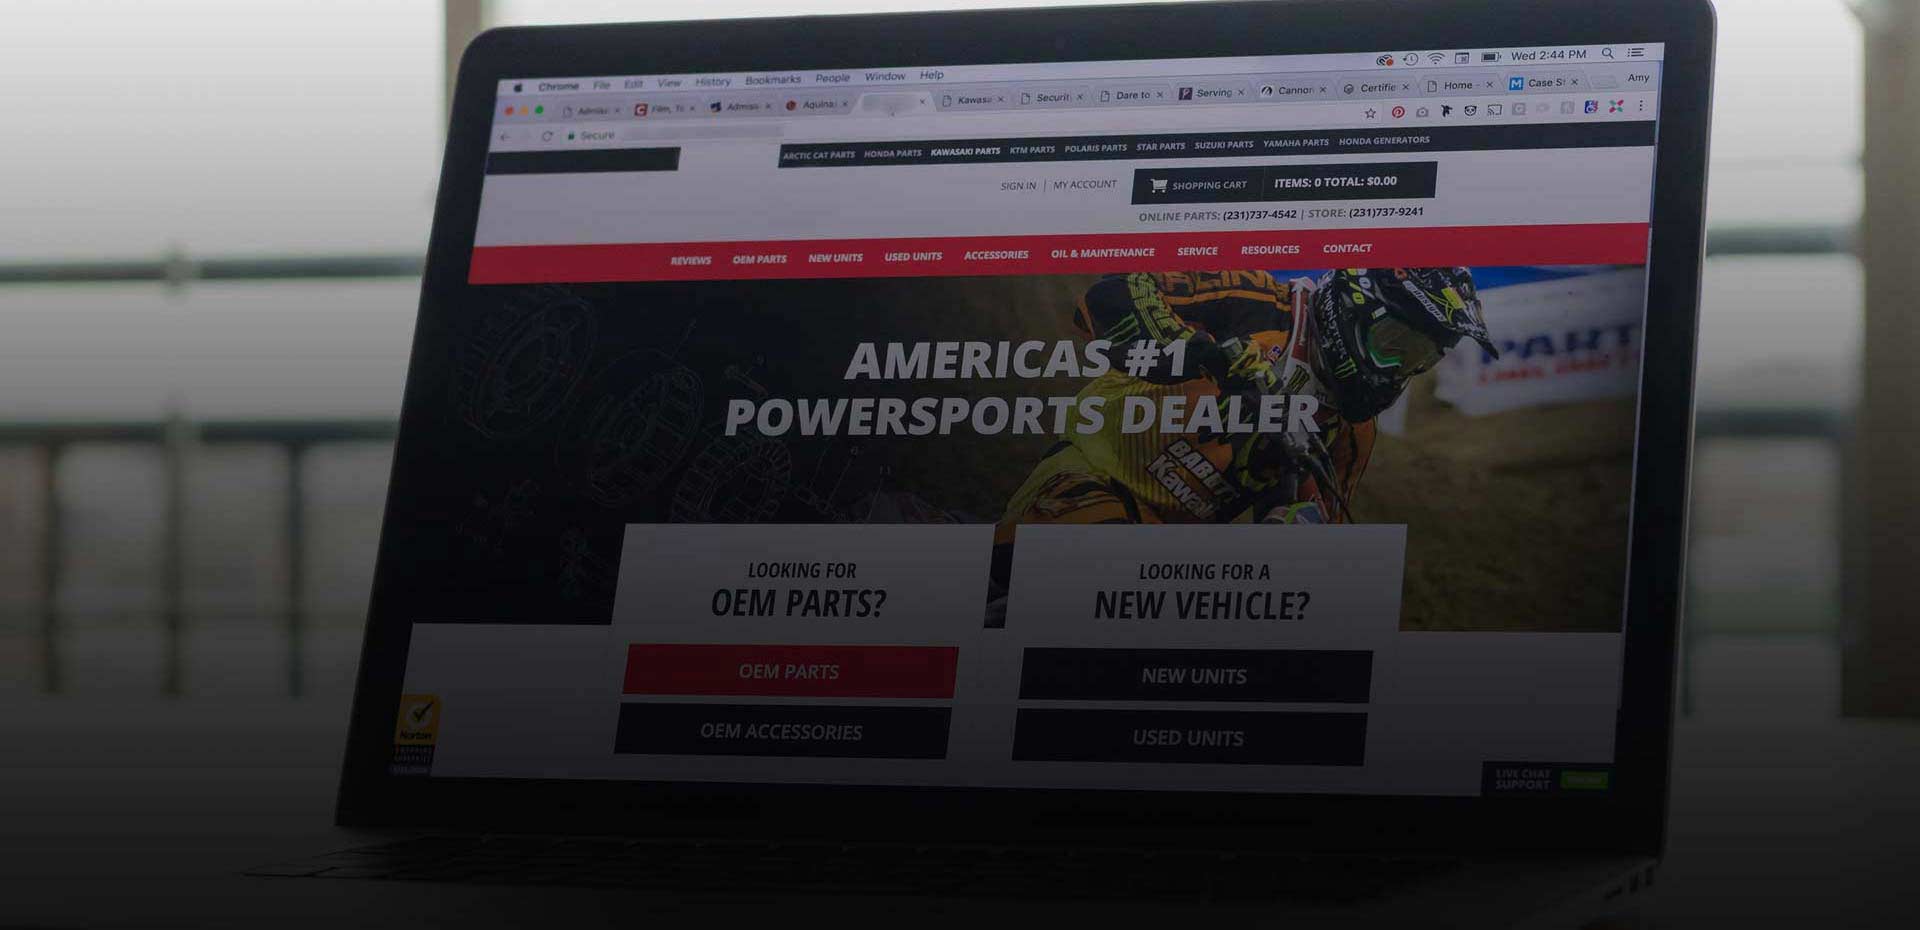 Accurate & updated product specifications data for powersports superstore enhances conversions Banner